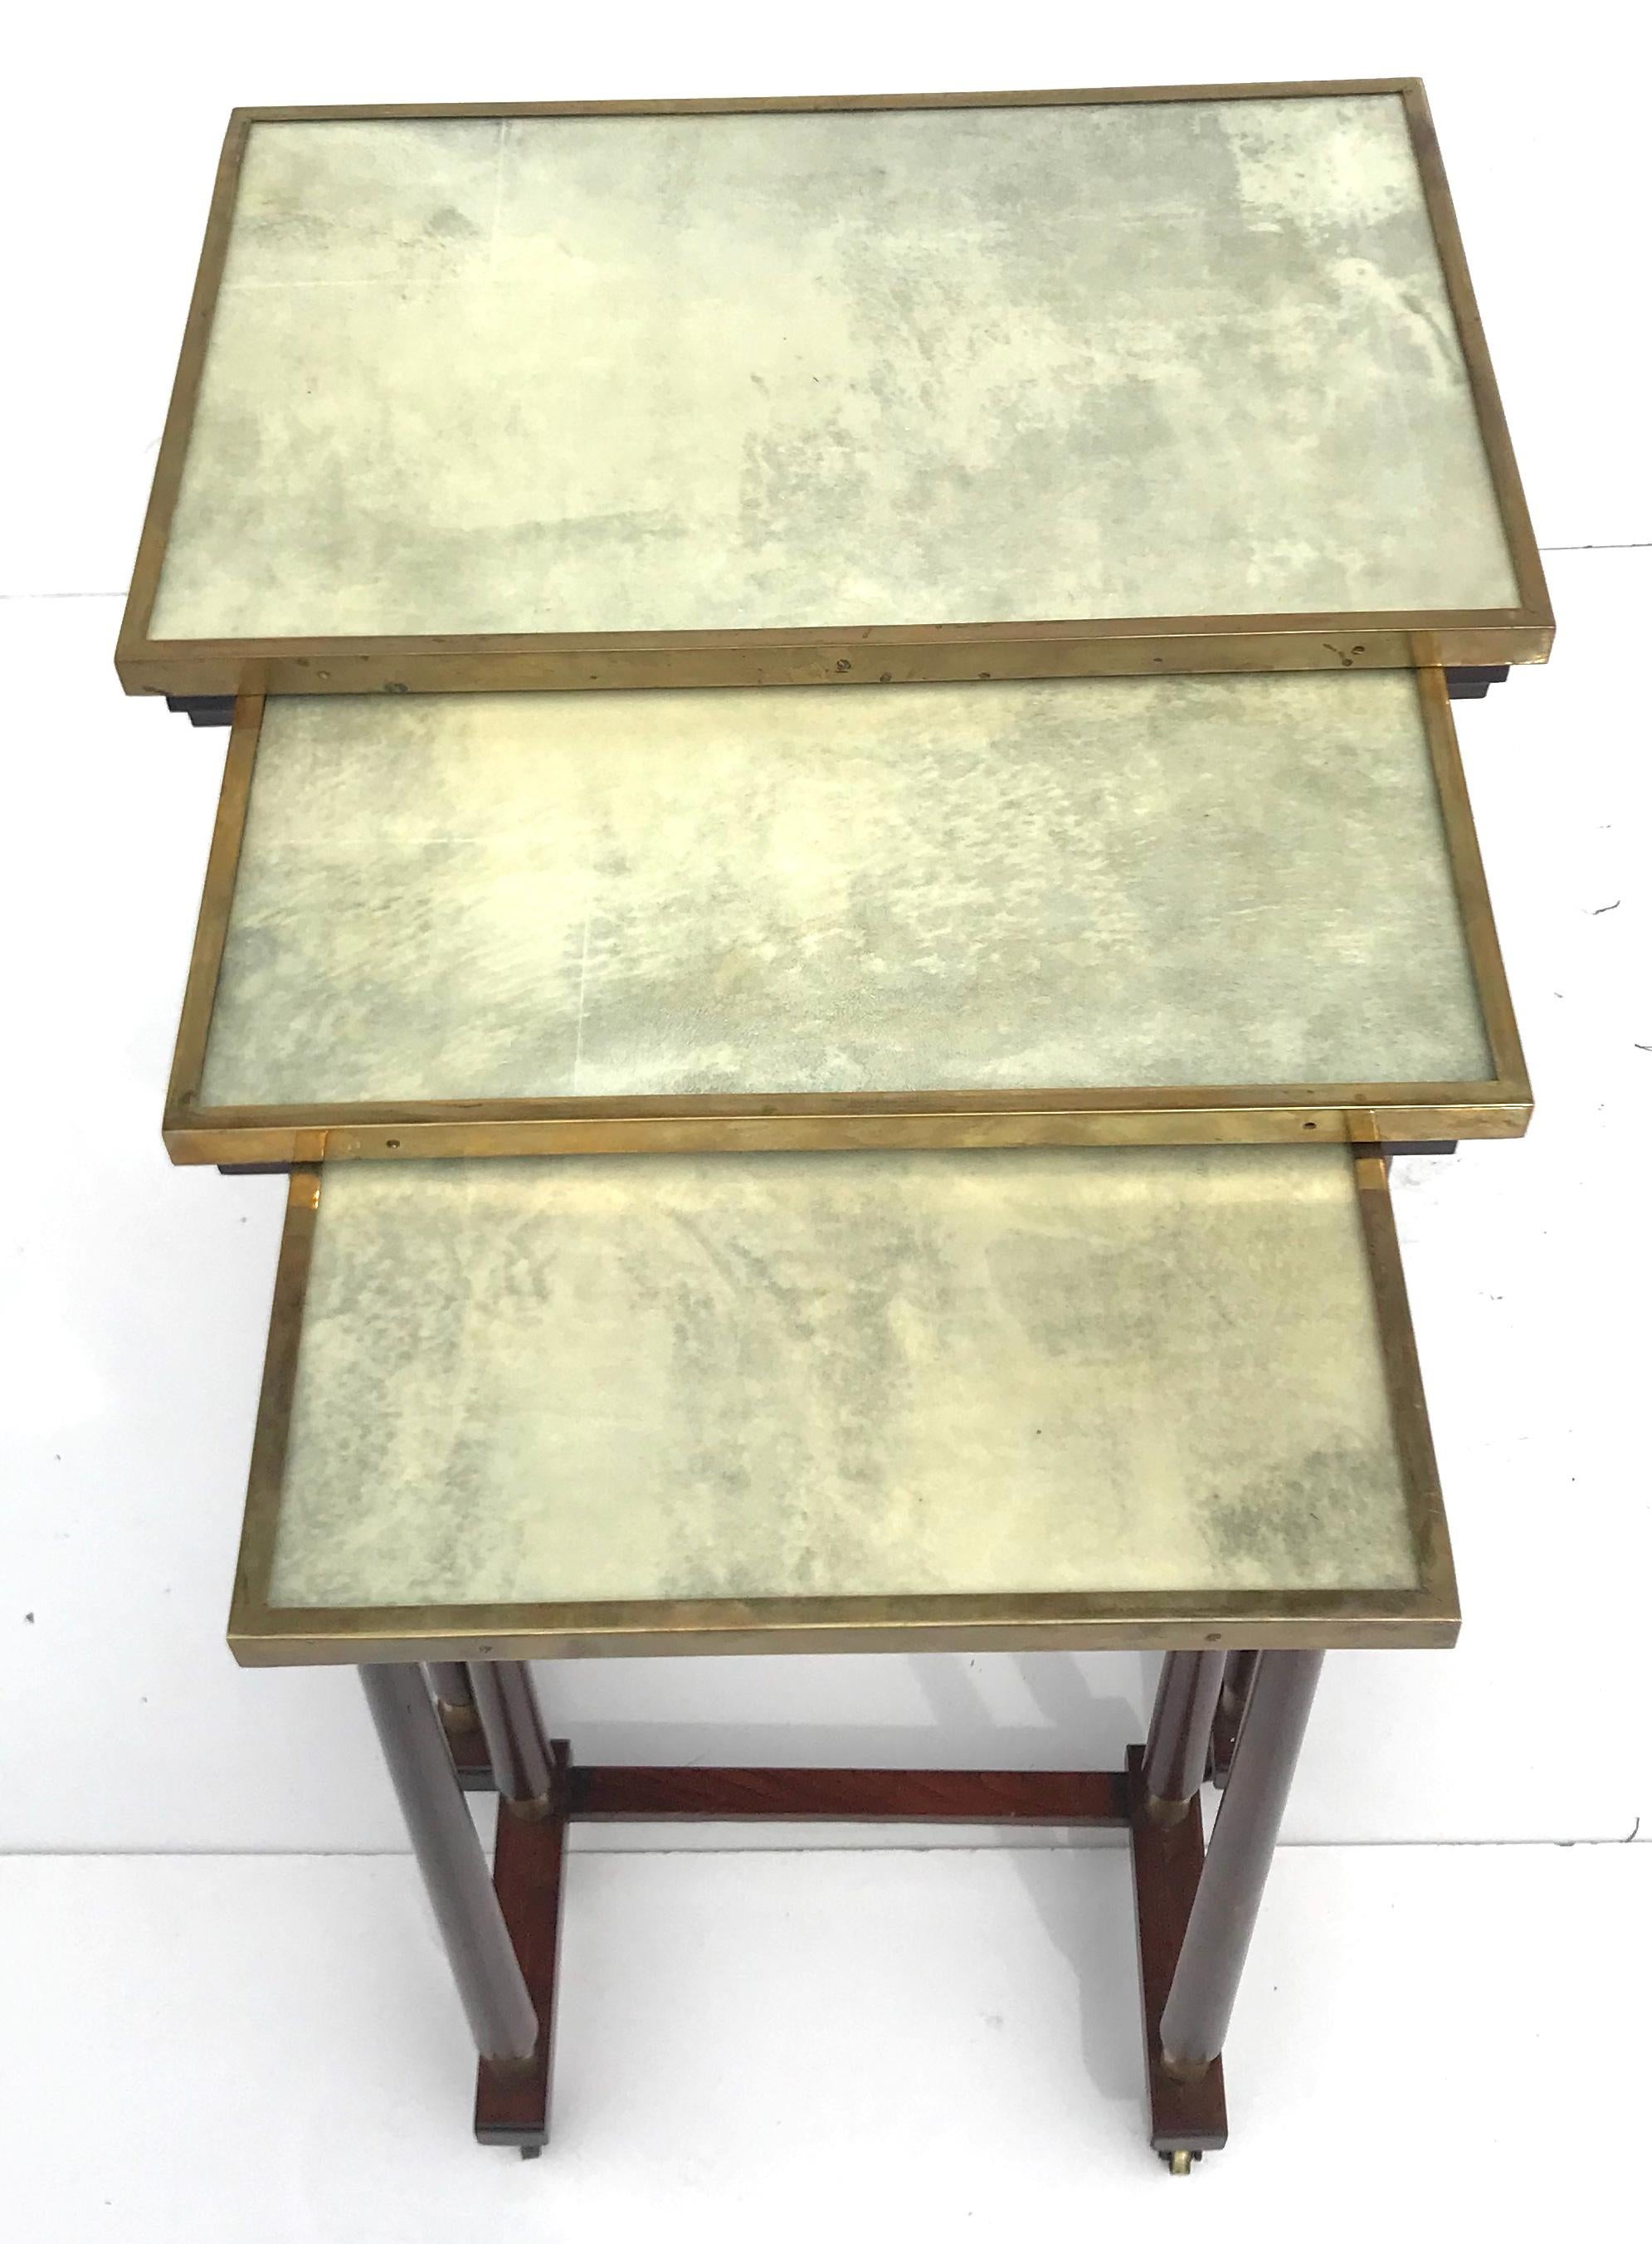 Chic set of 1950s Italian modern nesting tables in the style of Paolo Buffa. Intricately designed, and beautifully crafted, they feature inlaid brass-framed parchment tops under glass, and mahogany legs with brass details and castors. Truly a